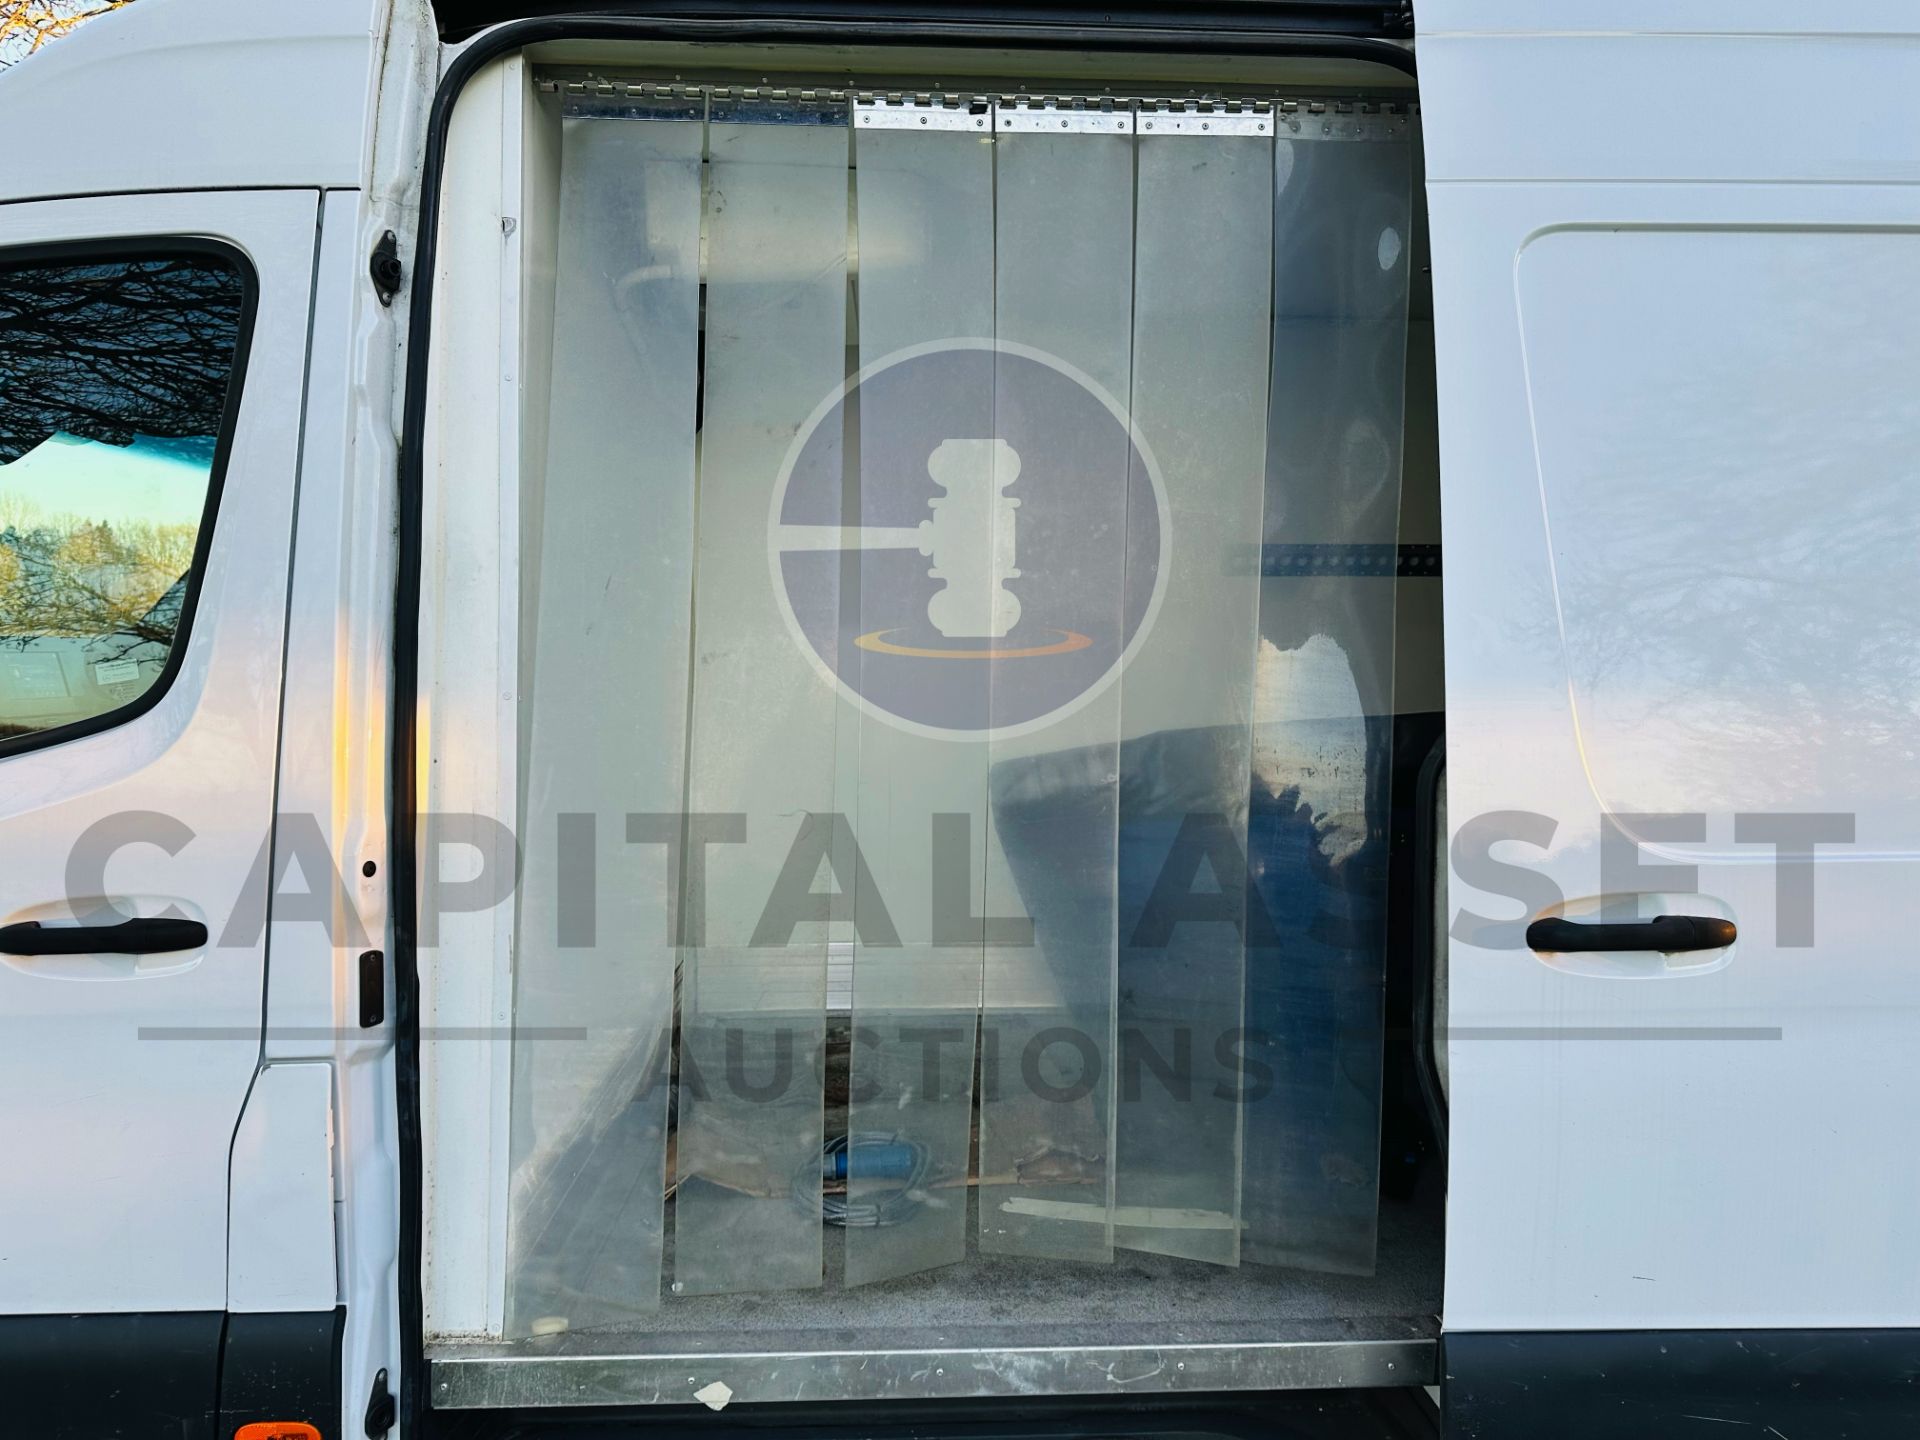 MERCEDES-BENZ SPRINTER 314 CDI *MWB - REFRIGERATED VAN* (2019 - FACELIFT MODEL) *OVERNIGHT STANDBY* - Image 14 of 33